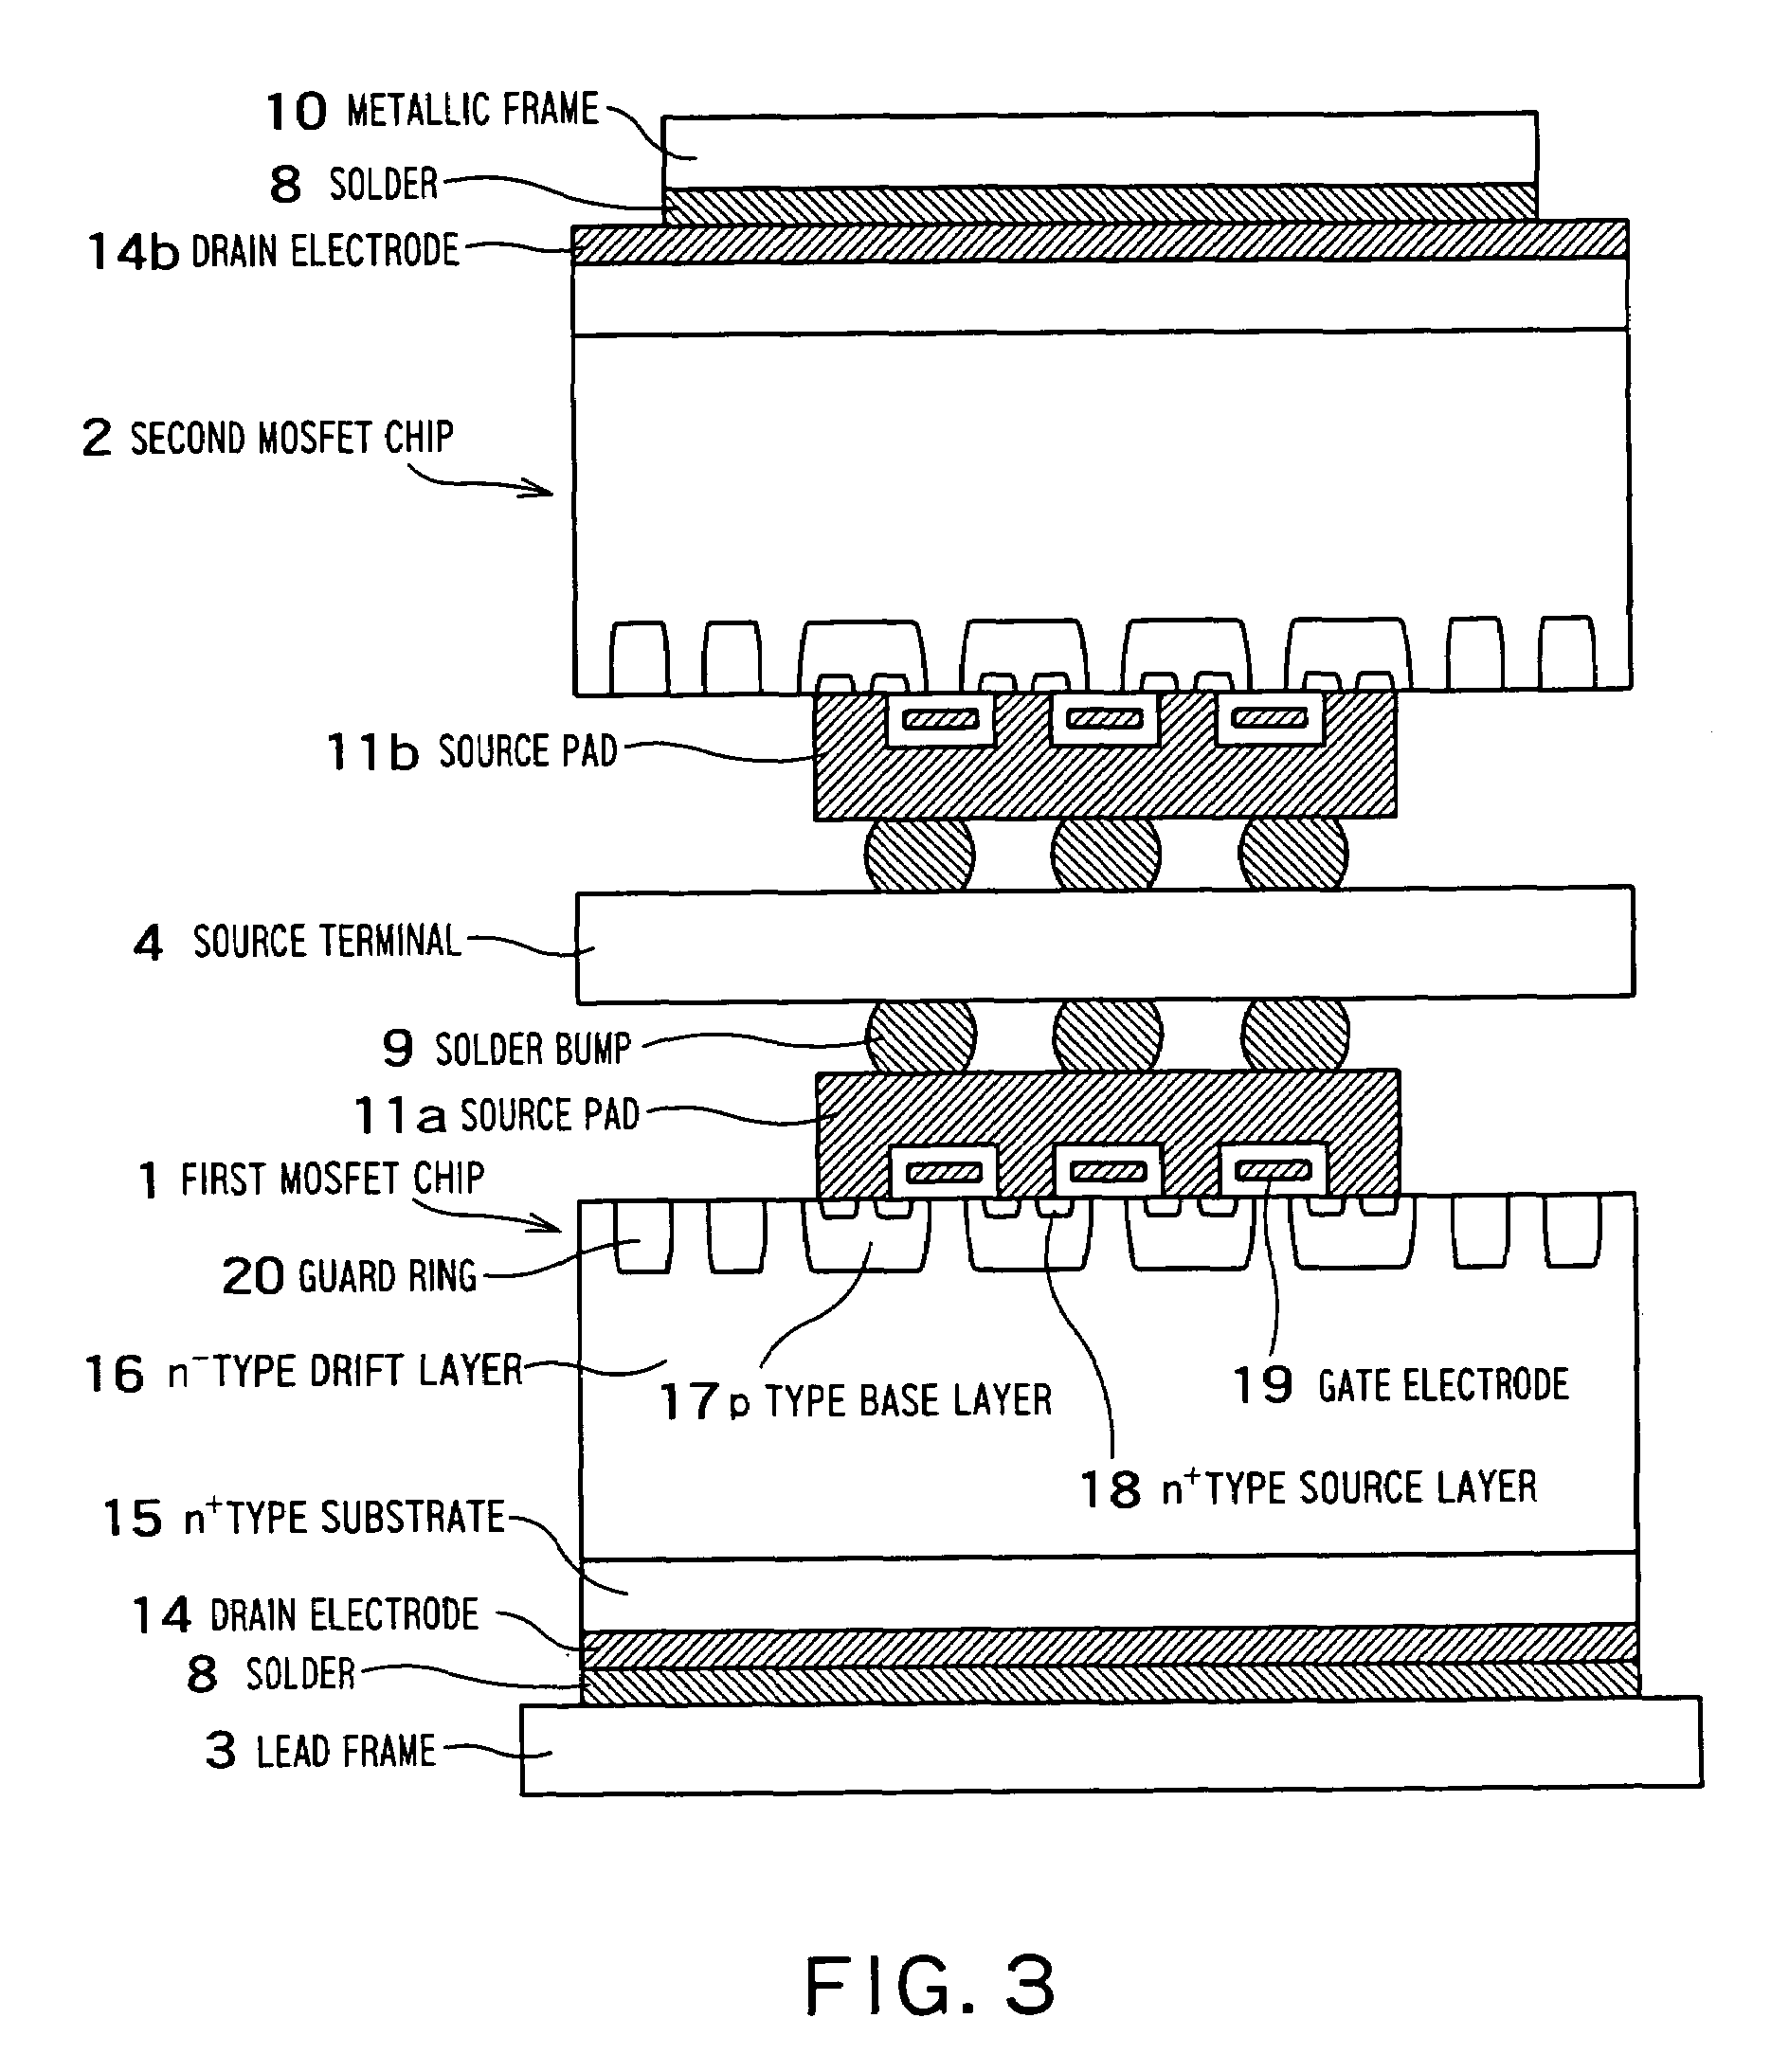 Power semiconductor device package